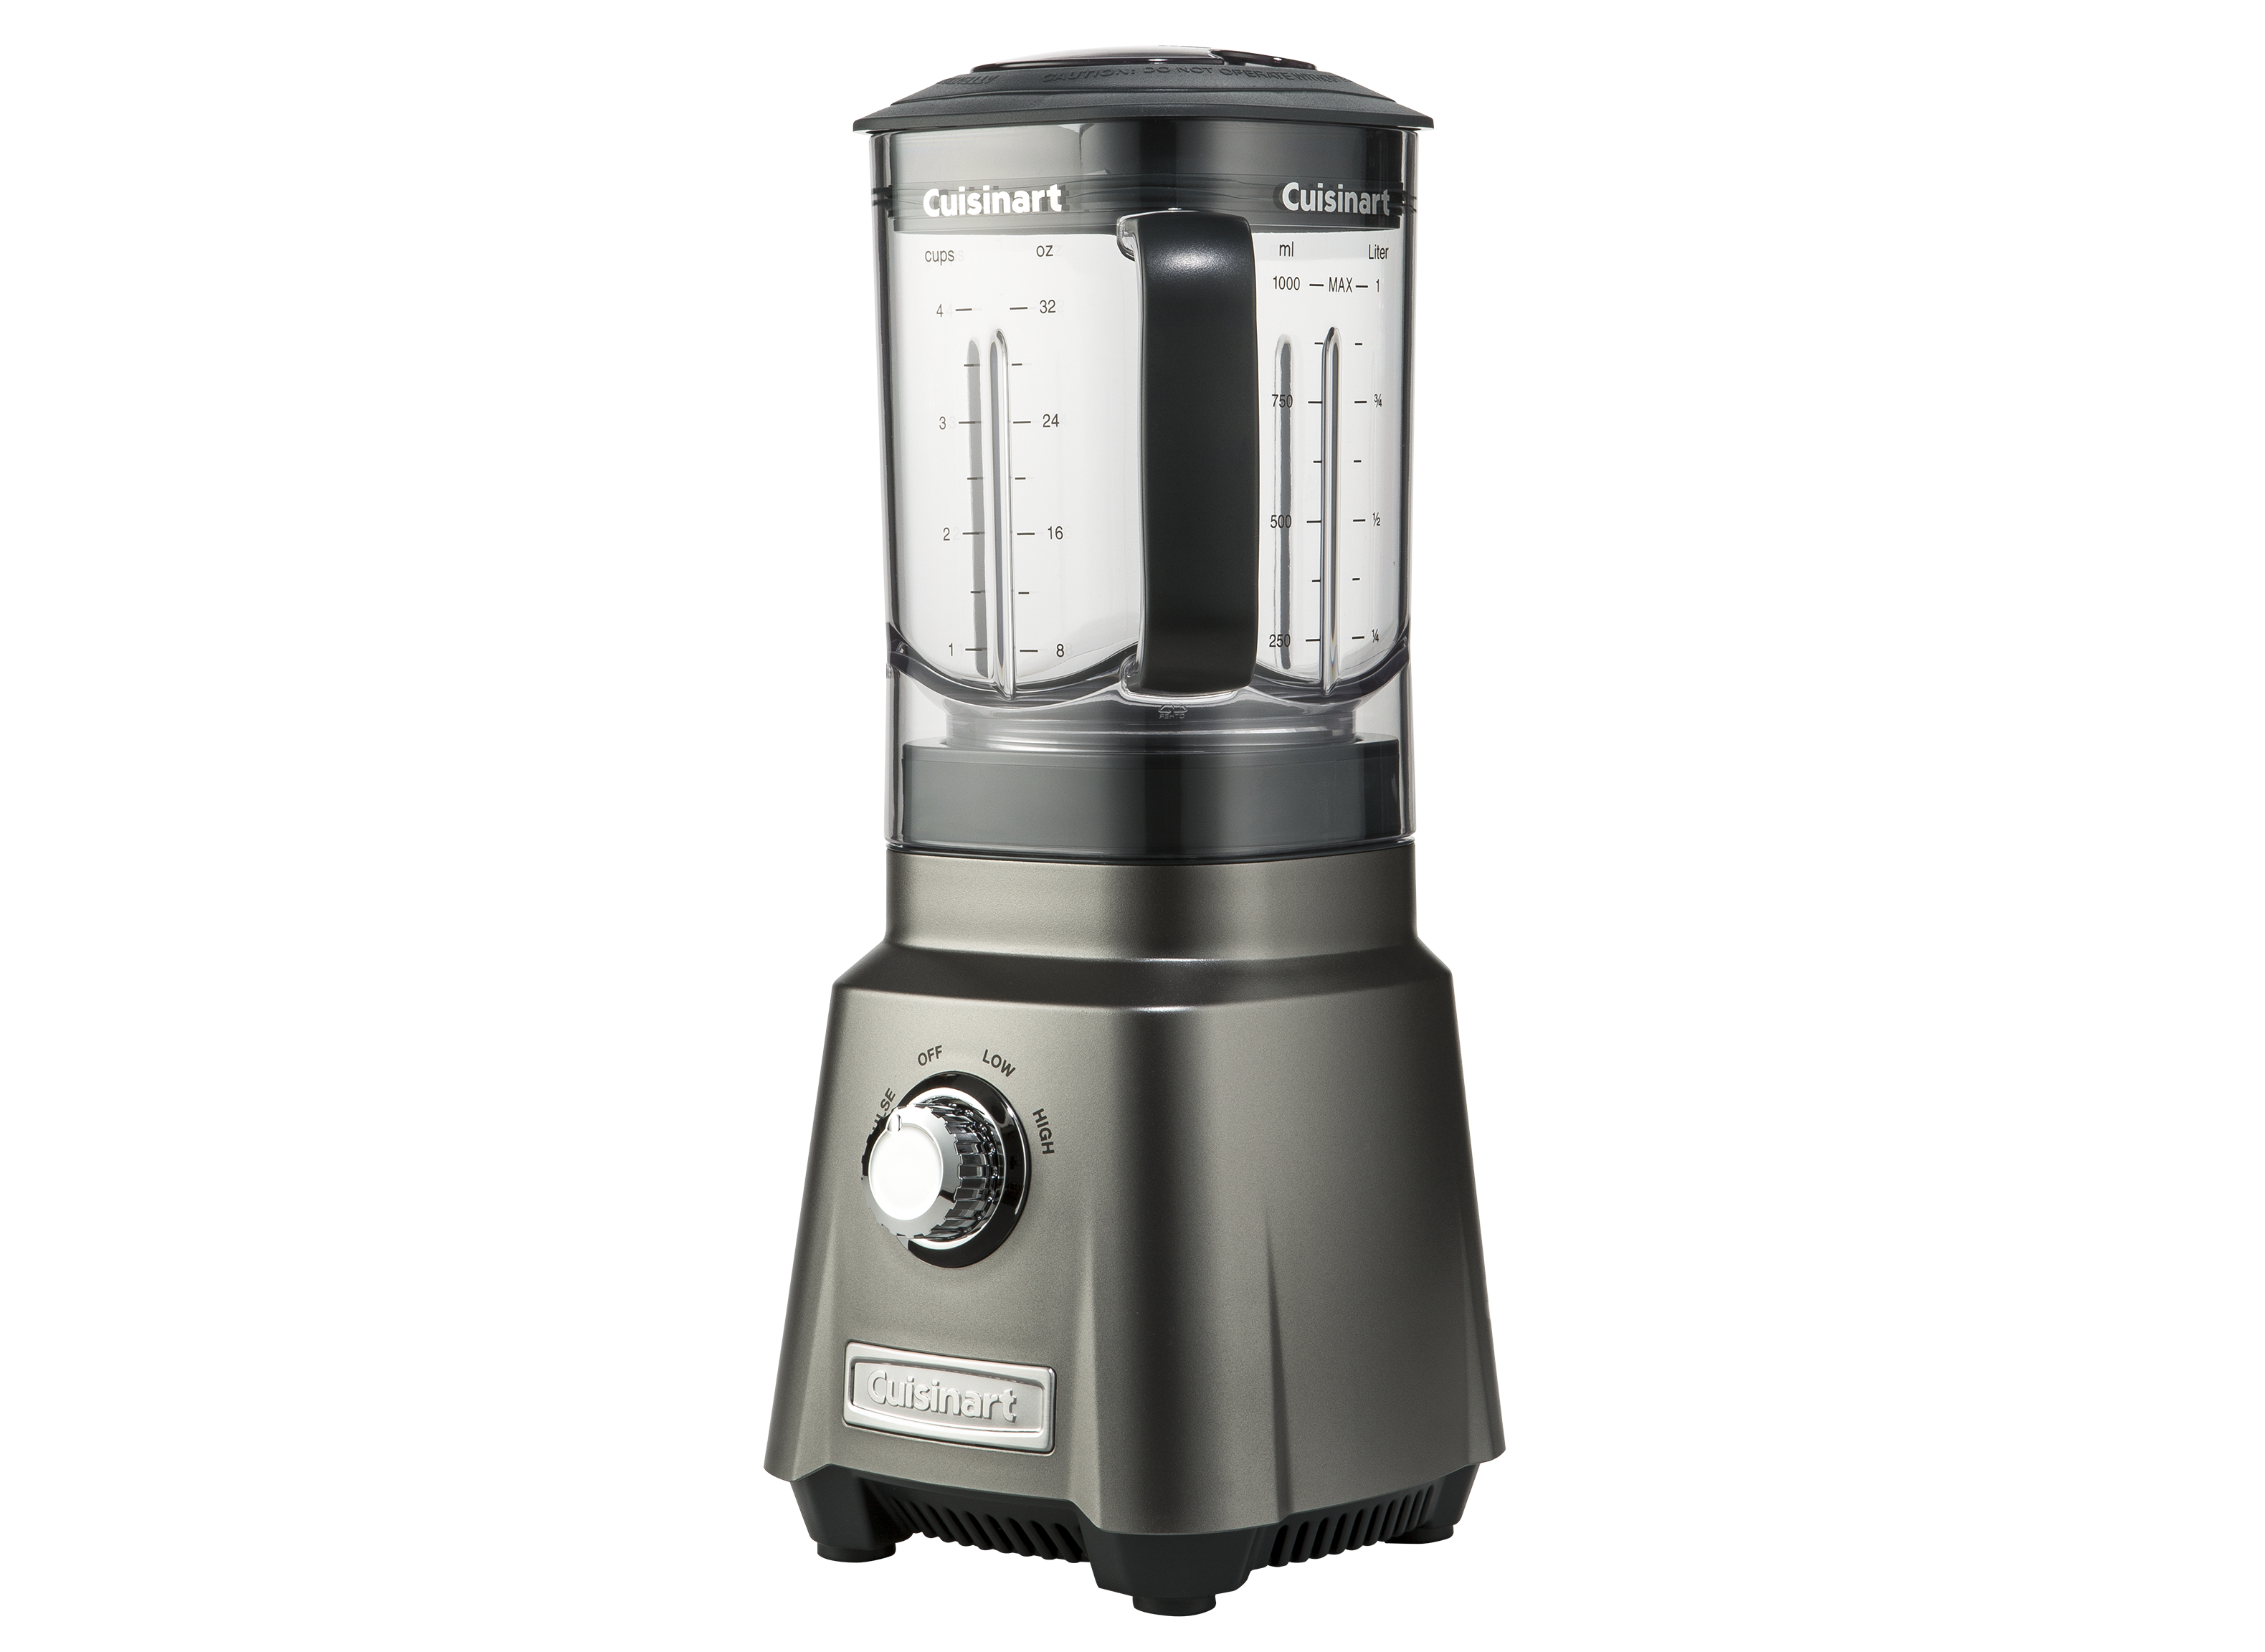 https://crdms.images.consumerreports.org/prod/products/cr/models/389556-blenders-cuisinart-hurricanecompactcpb380.png